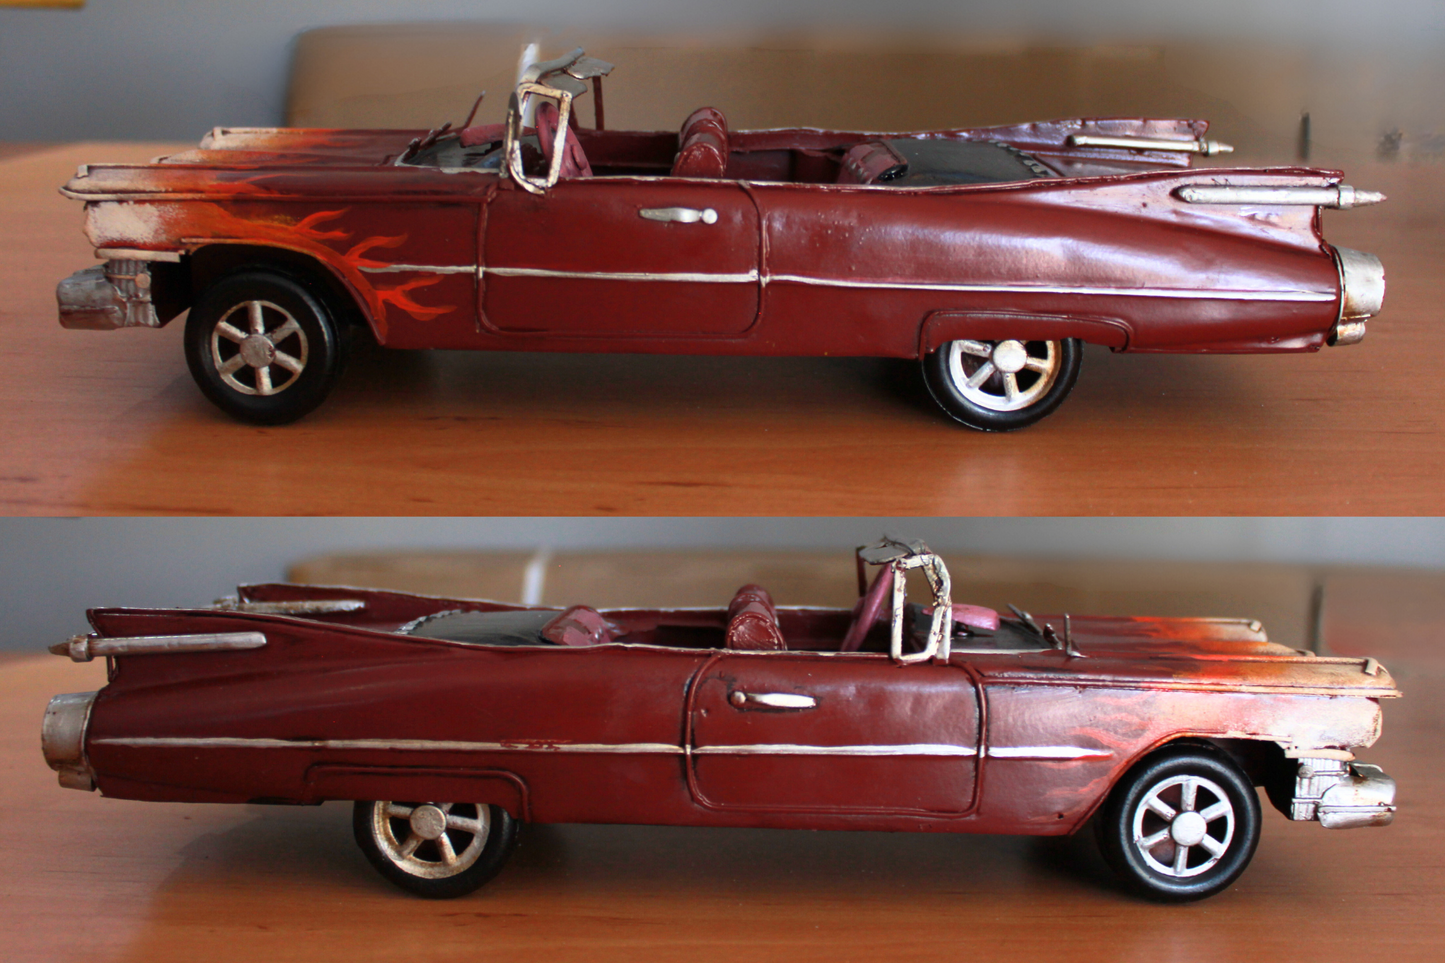 Vintage Hand Made Iron Art Rose Flame Painted 1959 Cadillac Convertible Sports Car Model